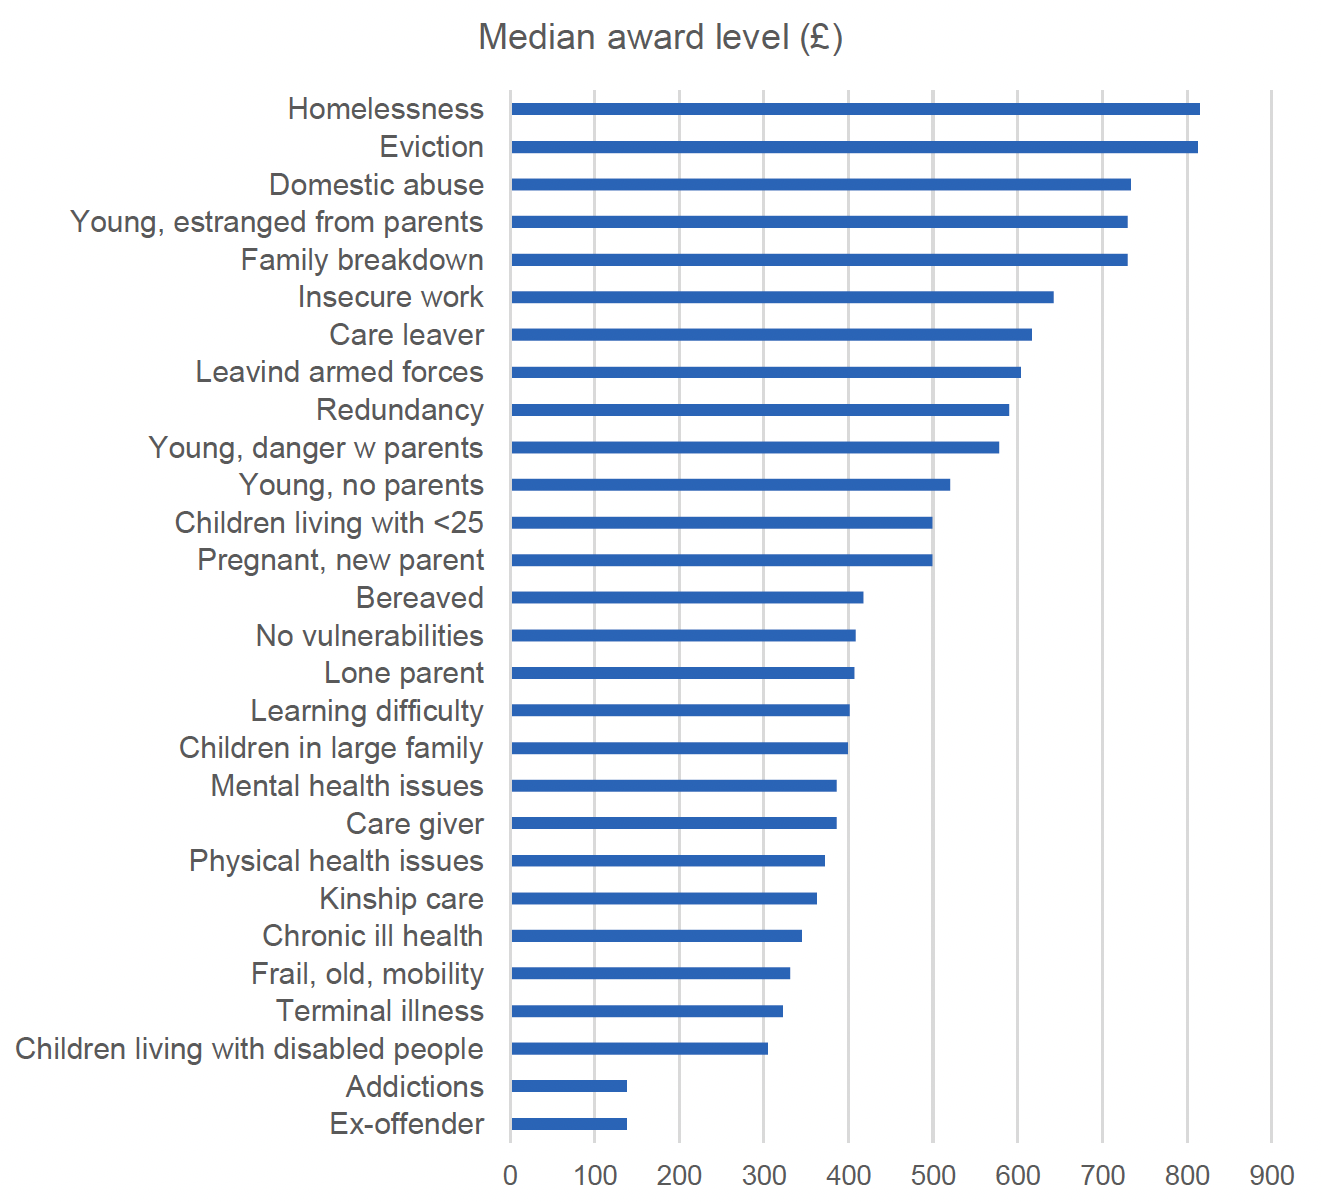 This figure shows the median award level for Community Care Grants by type of vulnerability for 2019/20. The main trends are described in the text. 